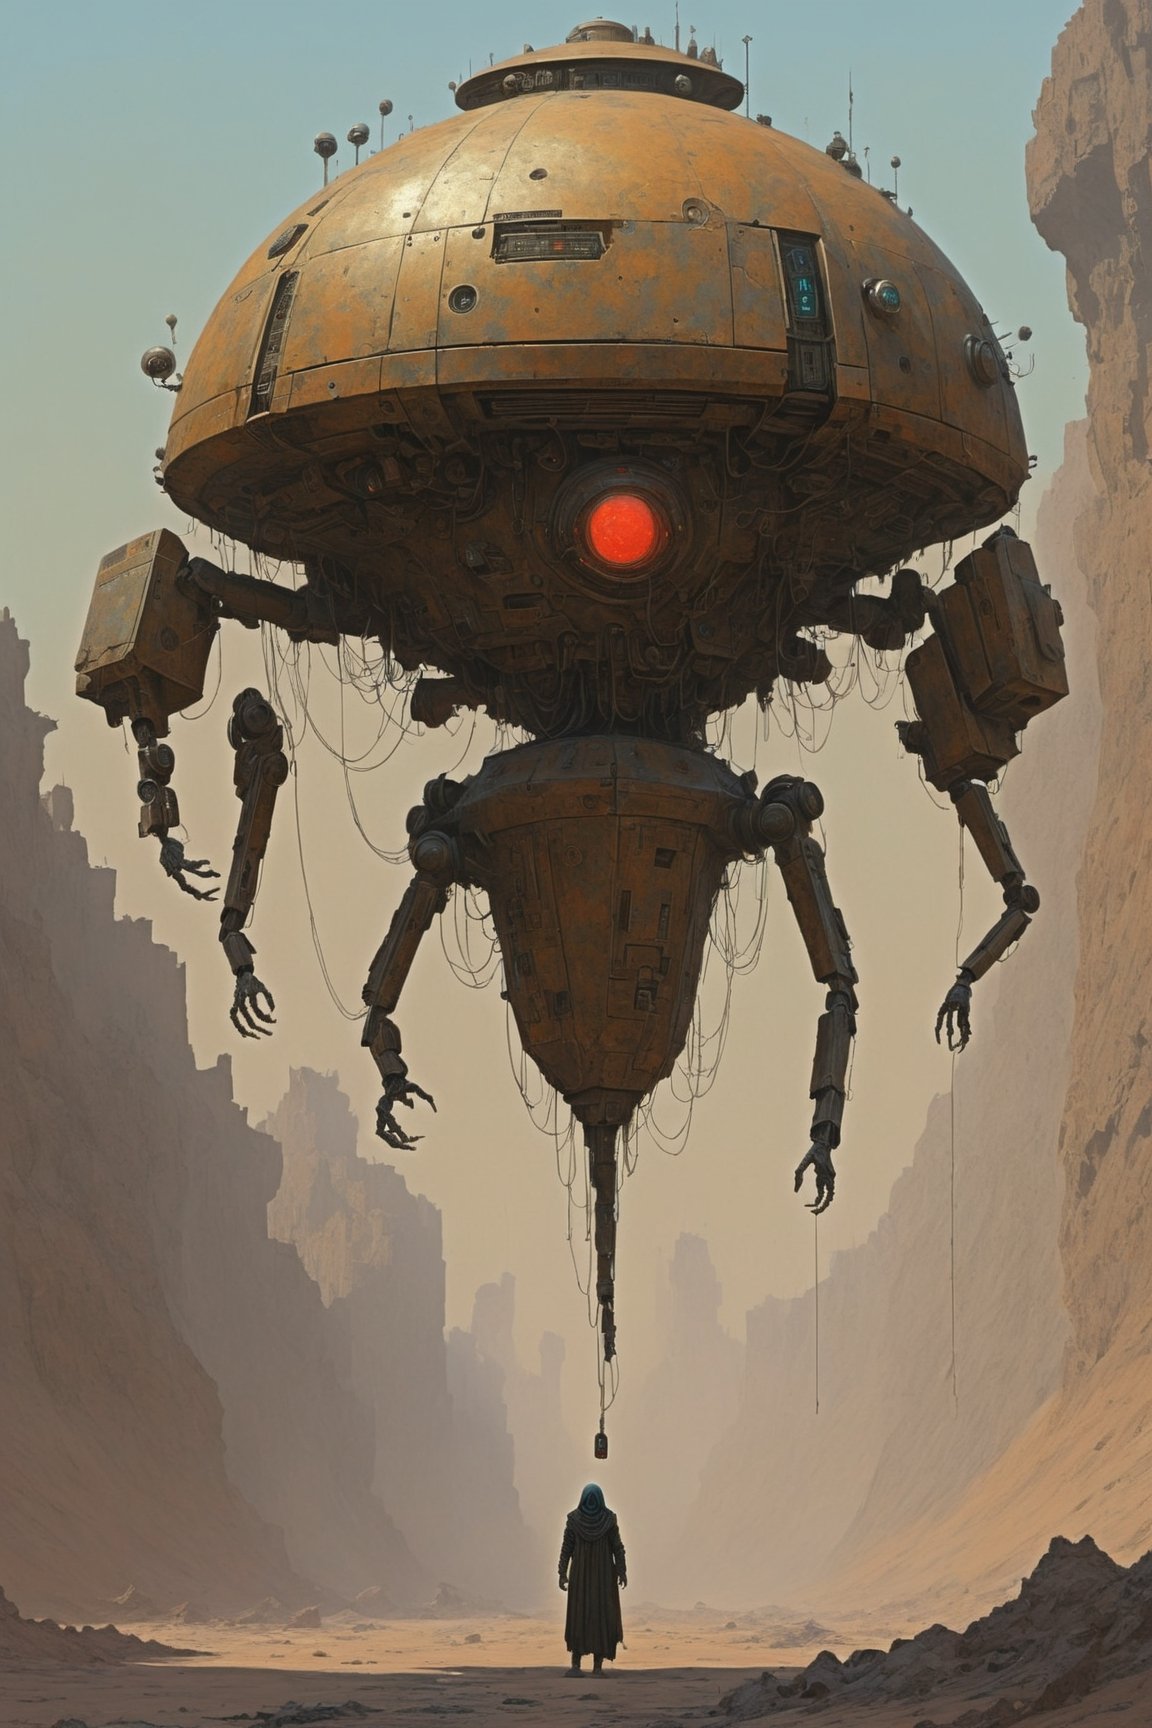 Fallout 5 Levitating Drone Companion, affectionately known as the "(((Squidrone,)))" a versatile and formidable ally equipped with levitation technology, a plethora of sensors, and both defensive and offensive capabilities.

,digital artwork by Beksinski